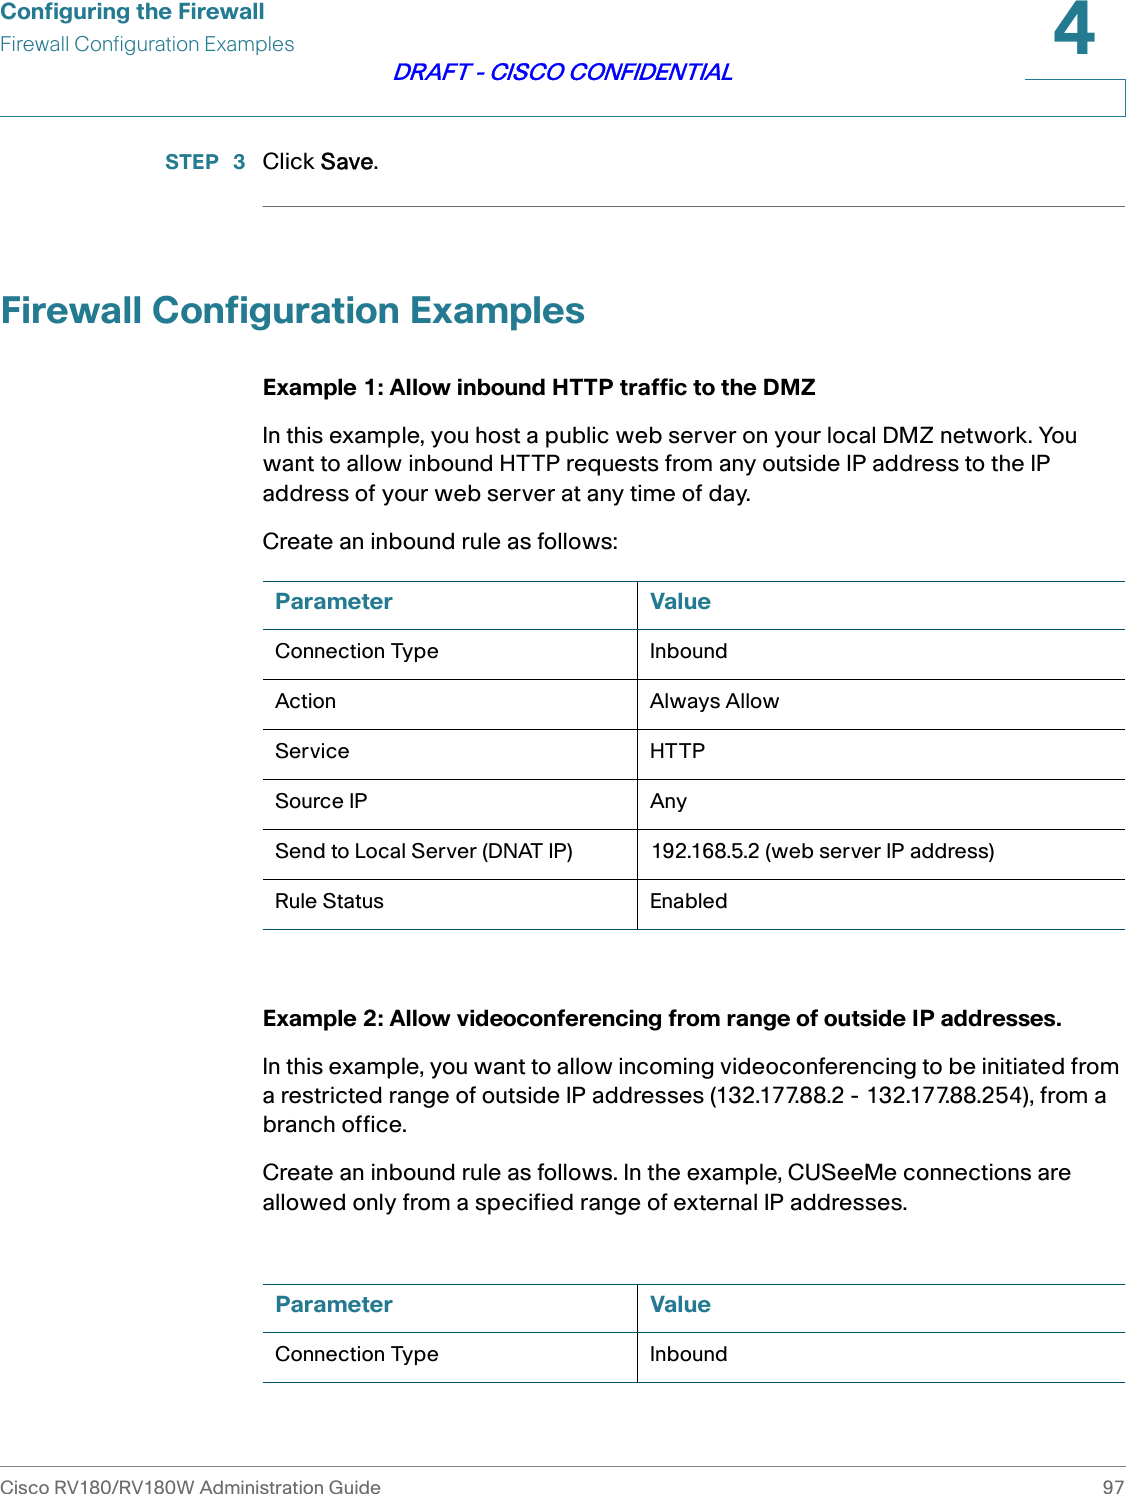 Configuring the FirewallFirewall Configuration ExamplesCisco RV180/RV180W Administration Guide 974DRAFT - CISCO CONFIDENTIALSTEP  3 Click Save.Firewall Configuration ExamplesExample 1: Allow inbound HTTP traffic to the DMZIn this example, you host a public web server on your local DMZ network. You want to allow inbound HTTP requests from any outside IP address to the IP address of your web server at any time of day.Create an inbound rule as follows:Example 2: Allow videoconferencing from range of outside IP addresses.In this example, you want to allow incoming videoconferencing to be initiated from a restricted range of outside IP addresses (132.177.88.2 - 132.177.88.254), from a branch office.Create an inbound rule as follows. In the example, CUSeeMe connections are allowed only from a specified range of external IP addresses.Parameter ValueConnection Type InboundAction Always AllowService HTTPSource IP AnySend to Local Server (DNAT IP) 192.168.5.2 (web server IP address)Rule Status EnabledParameter ValueConnection Type Inbound